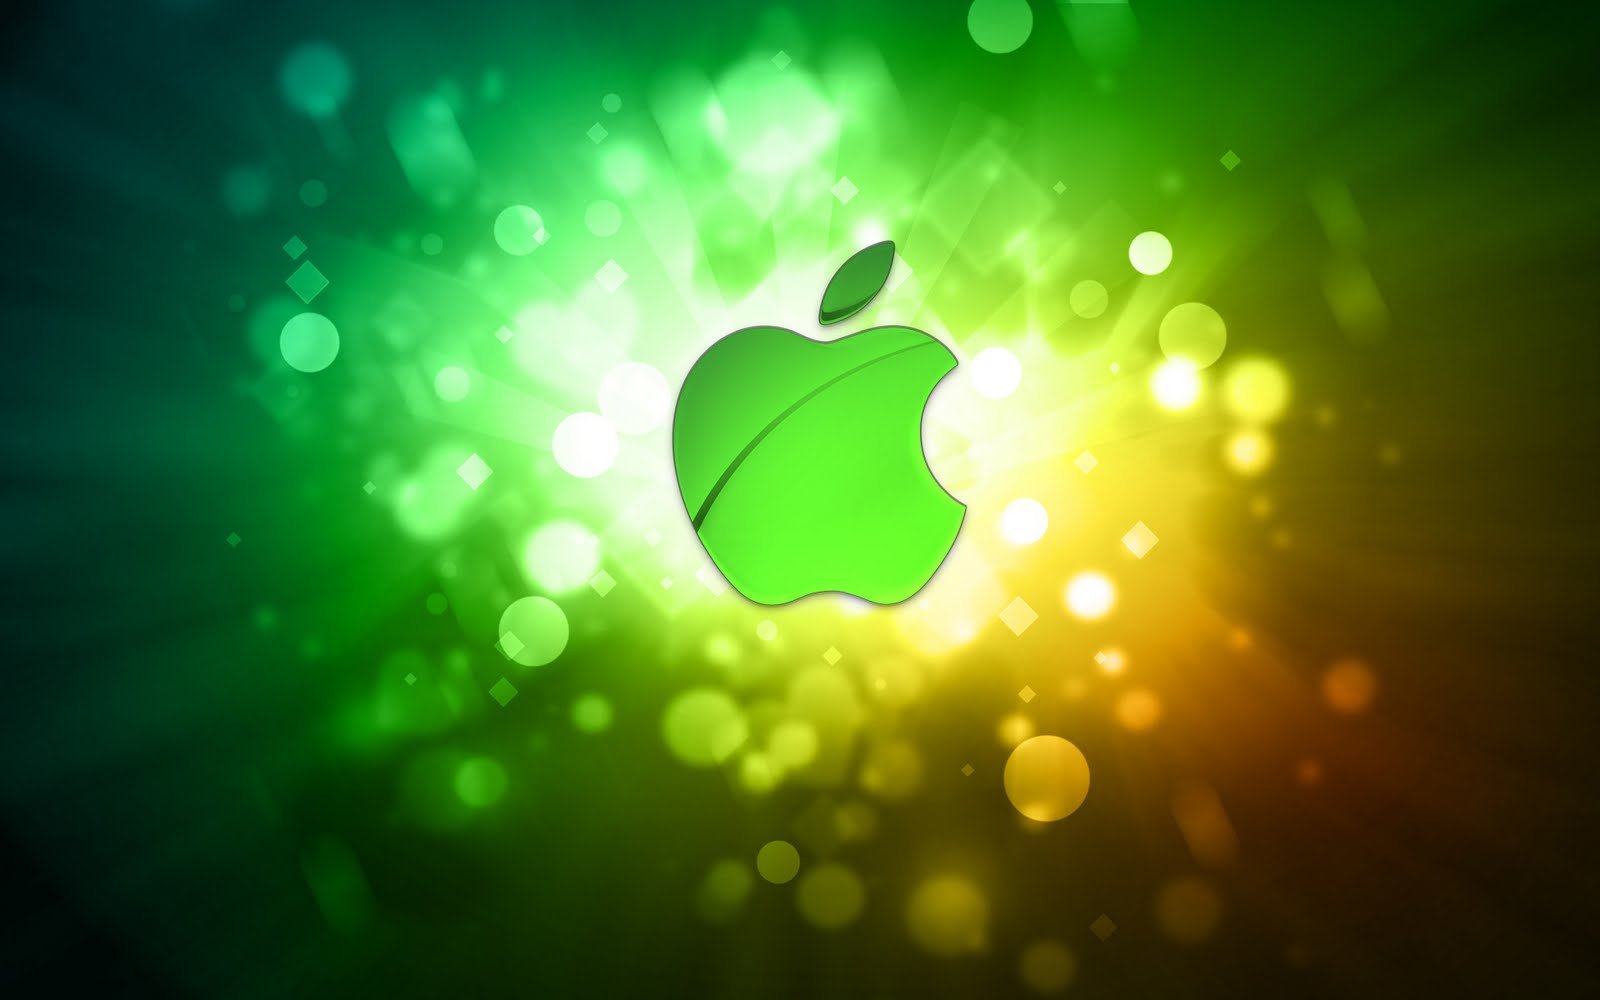 Abstract Apple Wallpaper Is A Great For Your Puter